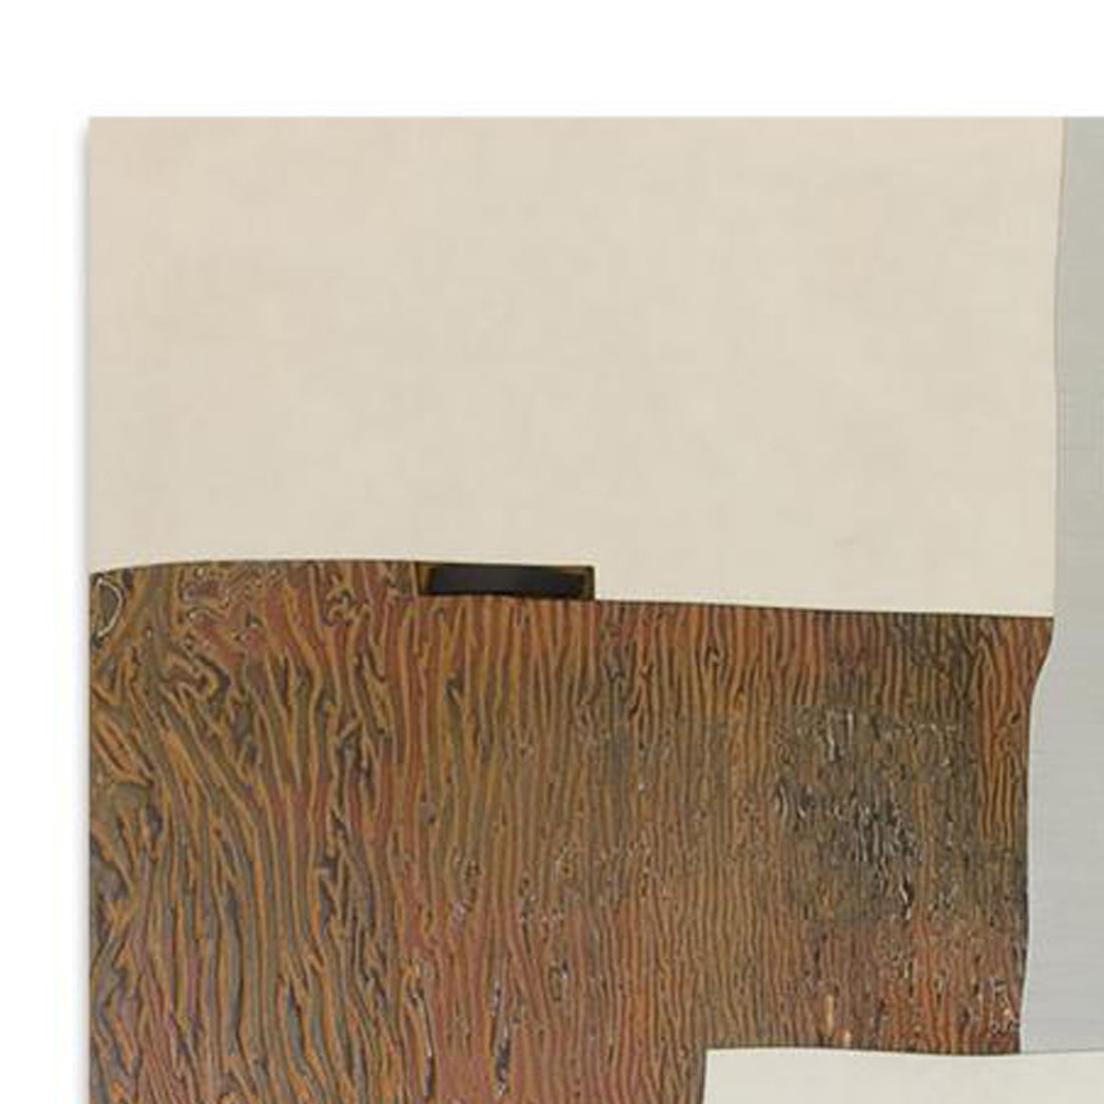 BLOC 261 by Pascal Pierme is a Mixed Media that measures 32.00 X 32.00 in and is priced at $6,000.

French-born sculptor, Pascal Pierme is inspired by his surroundings. For the last 20 years, those surroundings have been Santa Fe, New Mexico. A